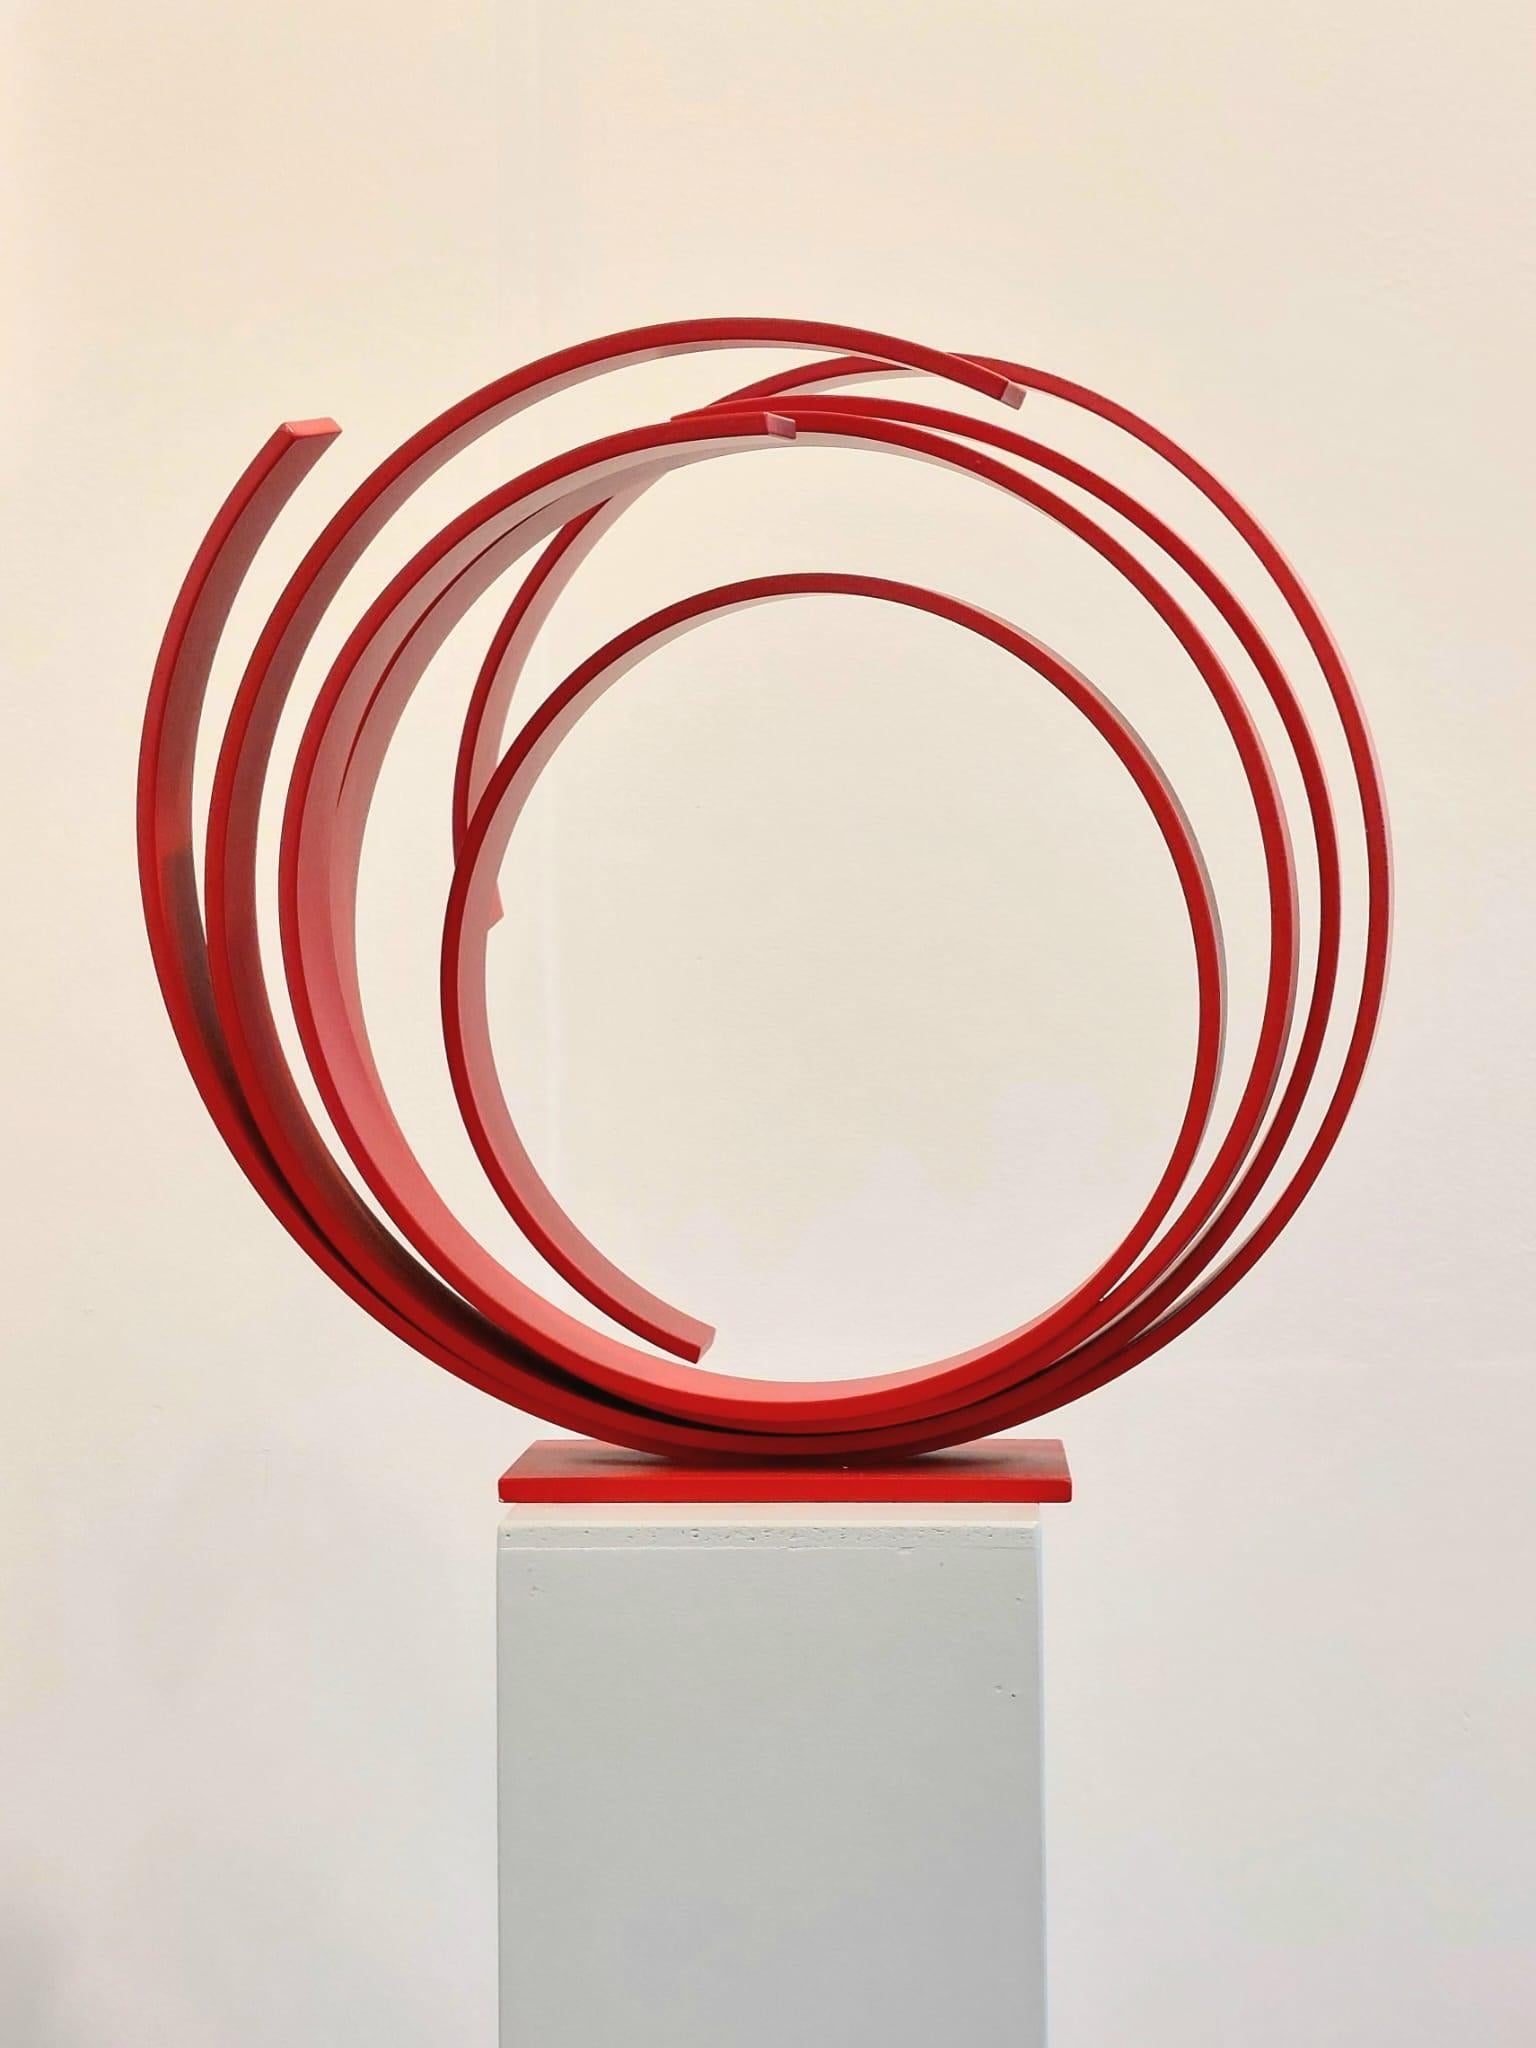 A large contemporary red powder coated steel sculpture. Beautiful on the floor or a pedestal. 
A contemporary statement piece full of elegance and movement.
_______________________________________________________________________

Born in 1951 in